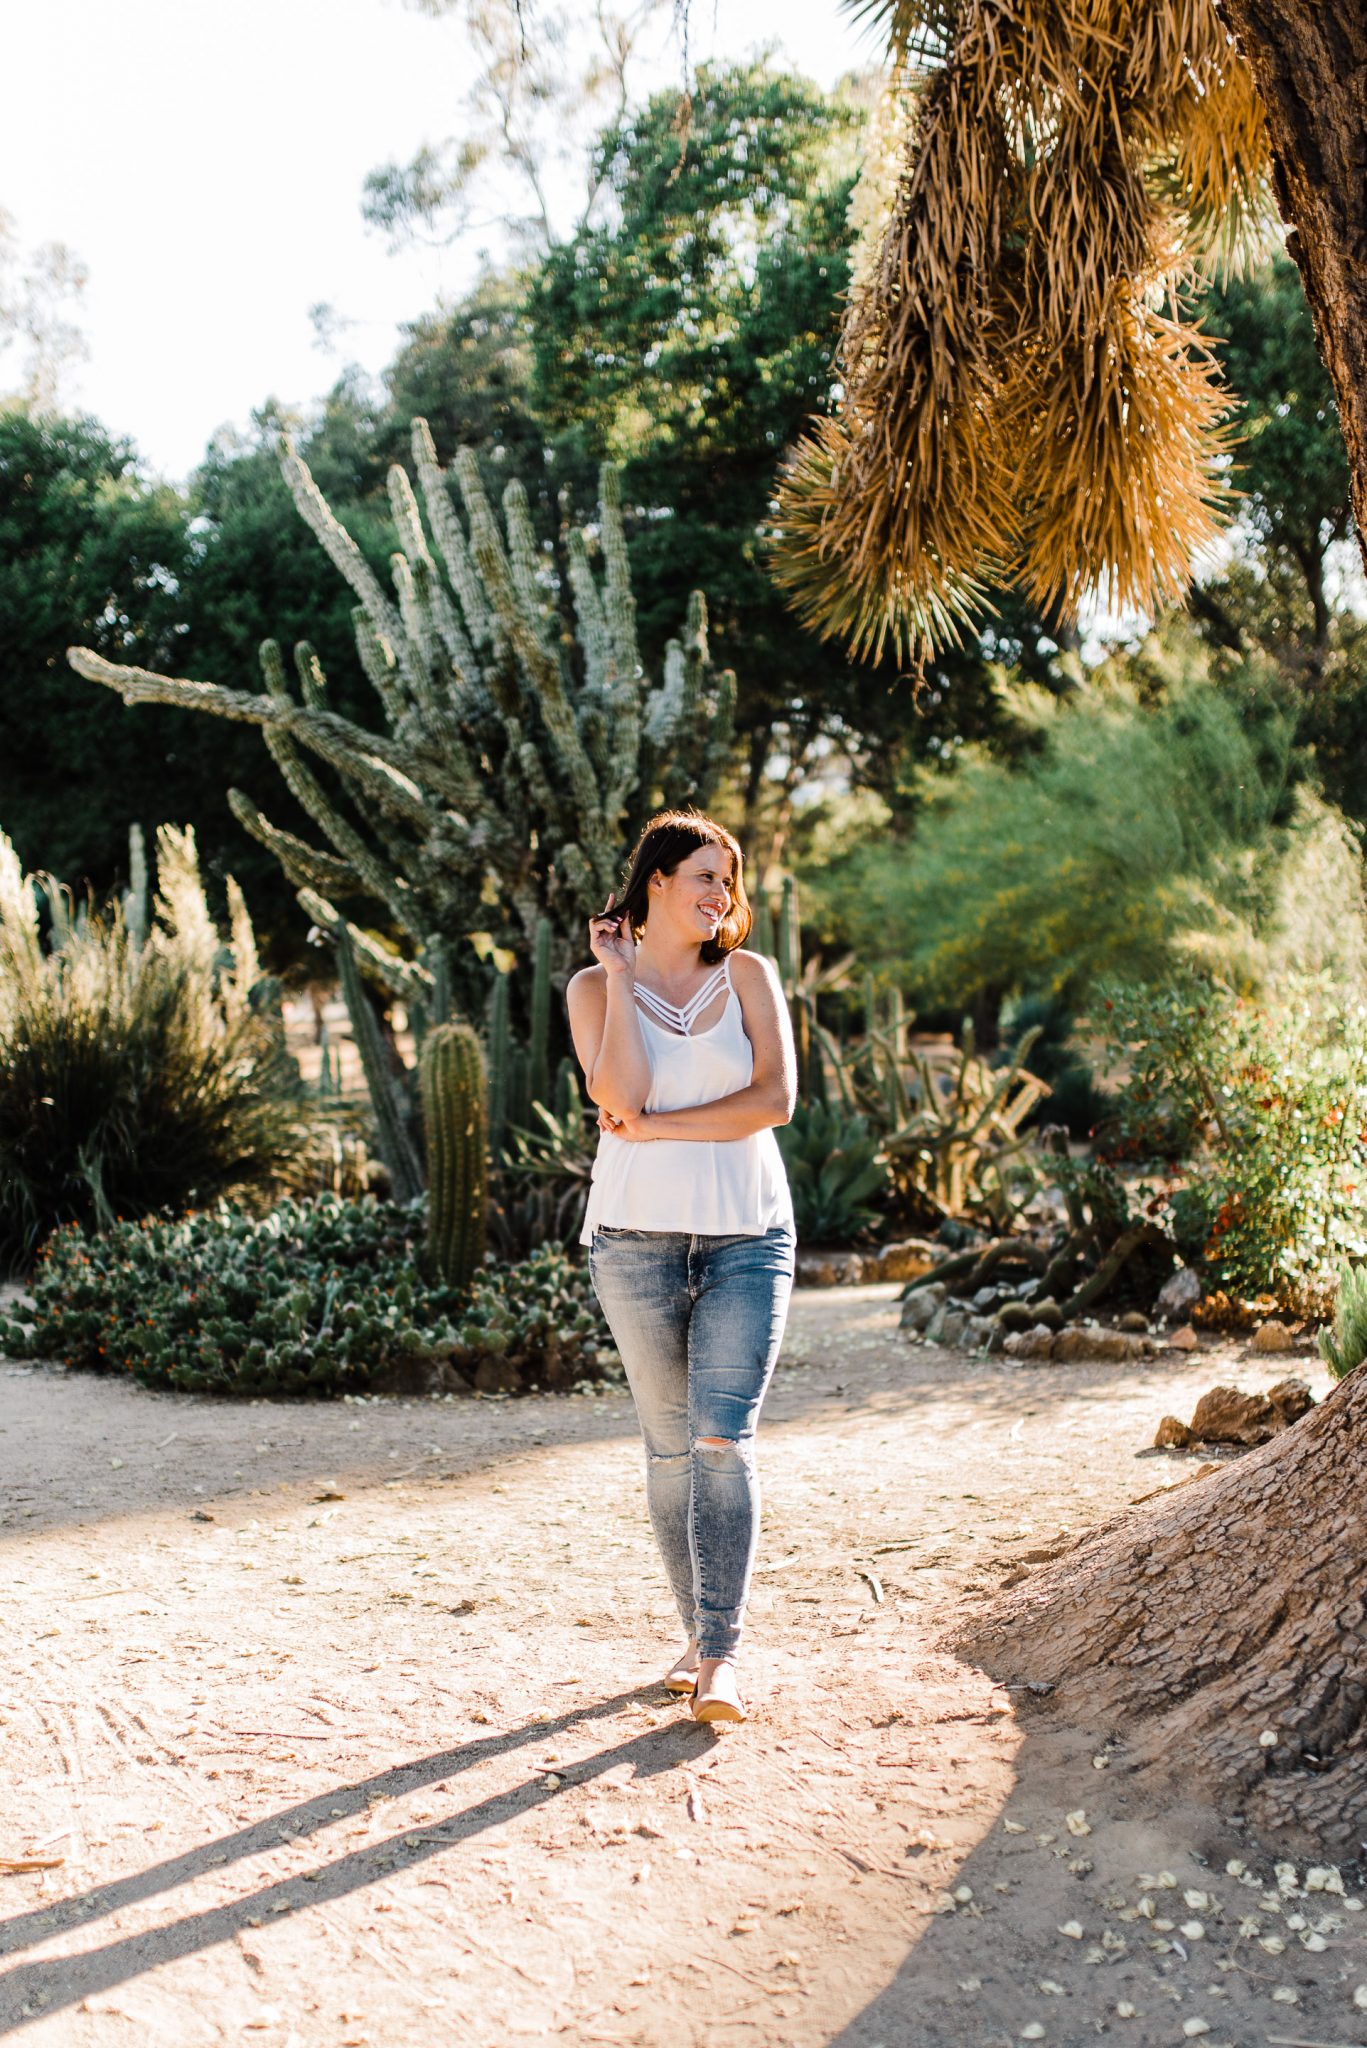 Kirsty at the Arizona Cactus Garden in Stanford, CA